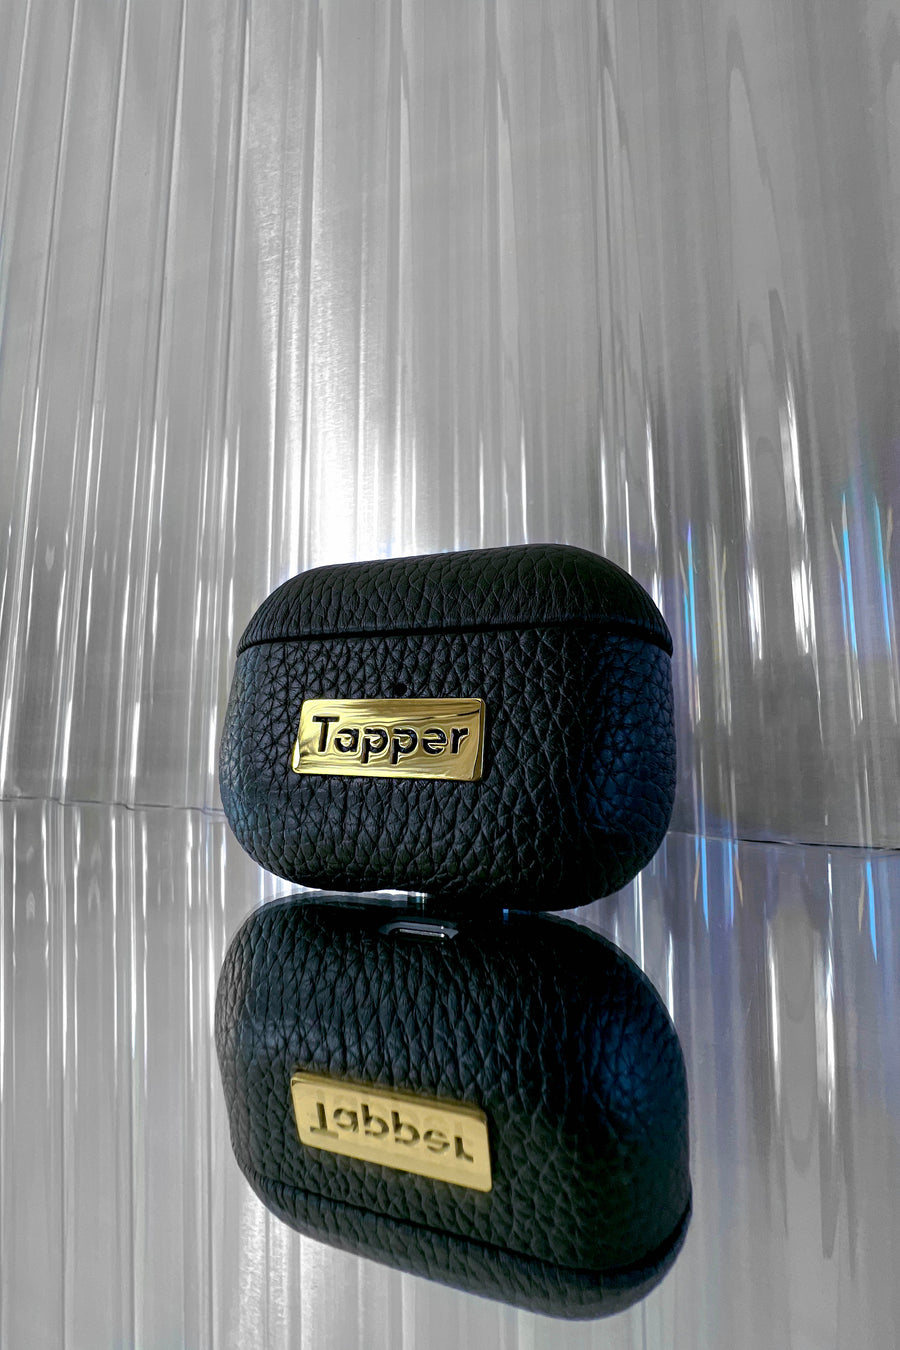 Tapper's luxurious black genuine cow leather AirPods case protects and elevates the look of your AirPods Pro. The luxurious, protective case for AirPods Pro with a metal logo plate in real 18k gold plating steps up your AirPods game. The next must-have high end protective Apple AirPods accessory in real leather and precious metals. Compatible with AirPods Pro. Designed in Sweden by Tapper. Free Express Shipping at gettapper.com